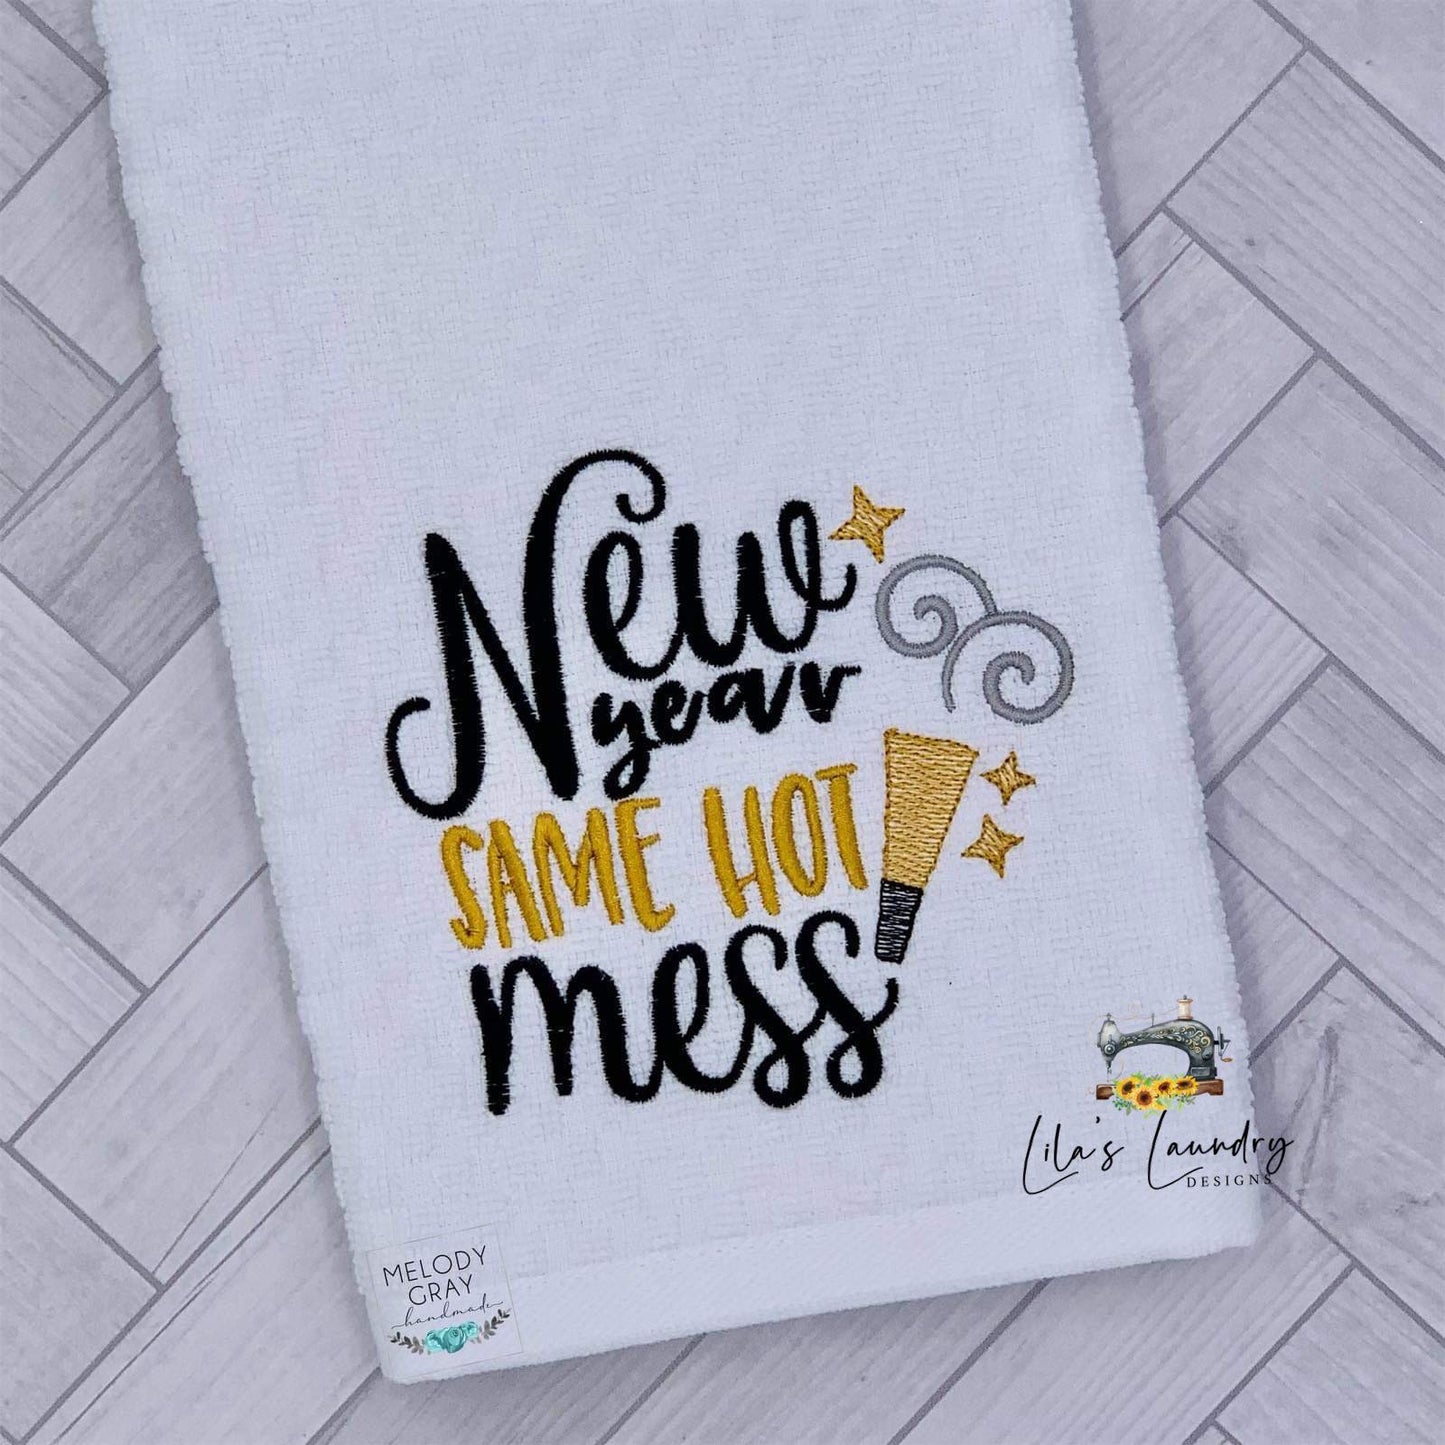 Same Hot Mess - 4 sizes- Digital Embroidery Design